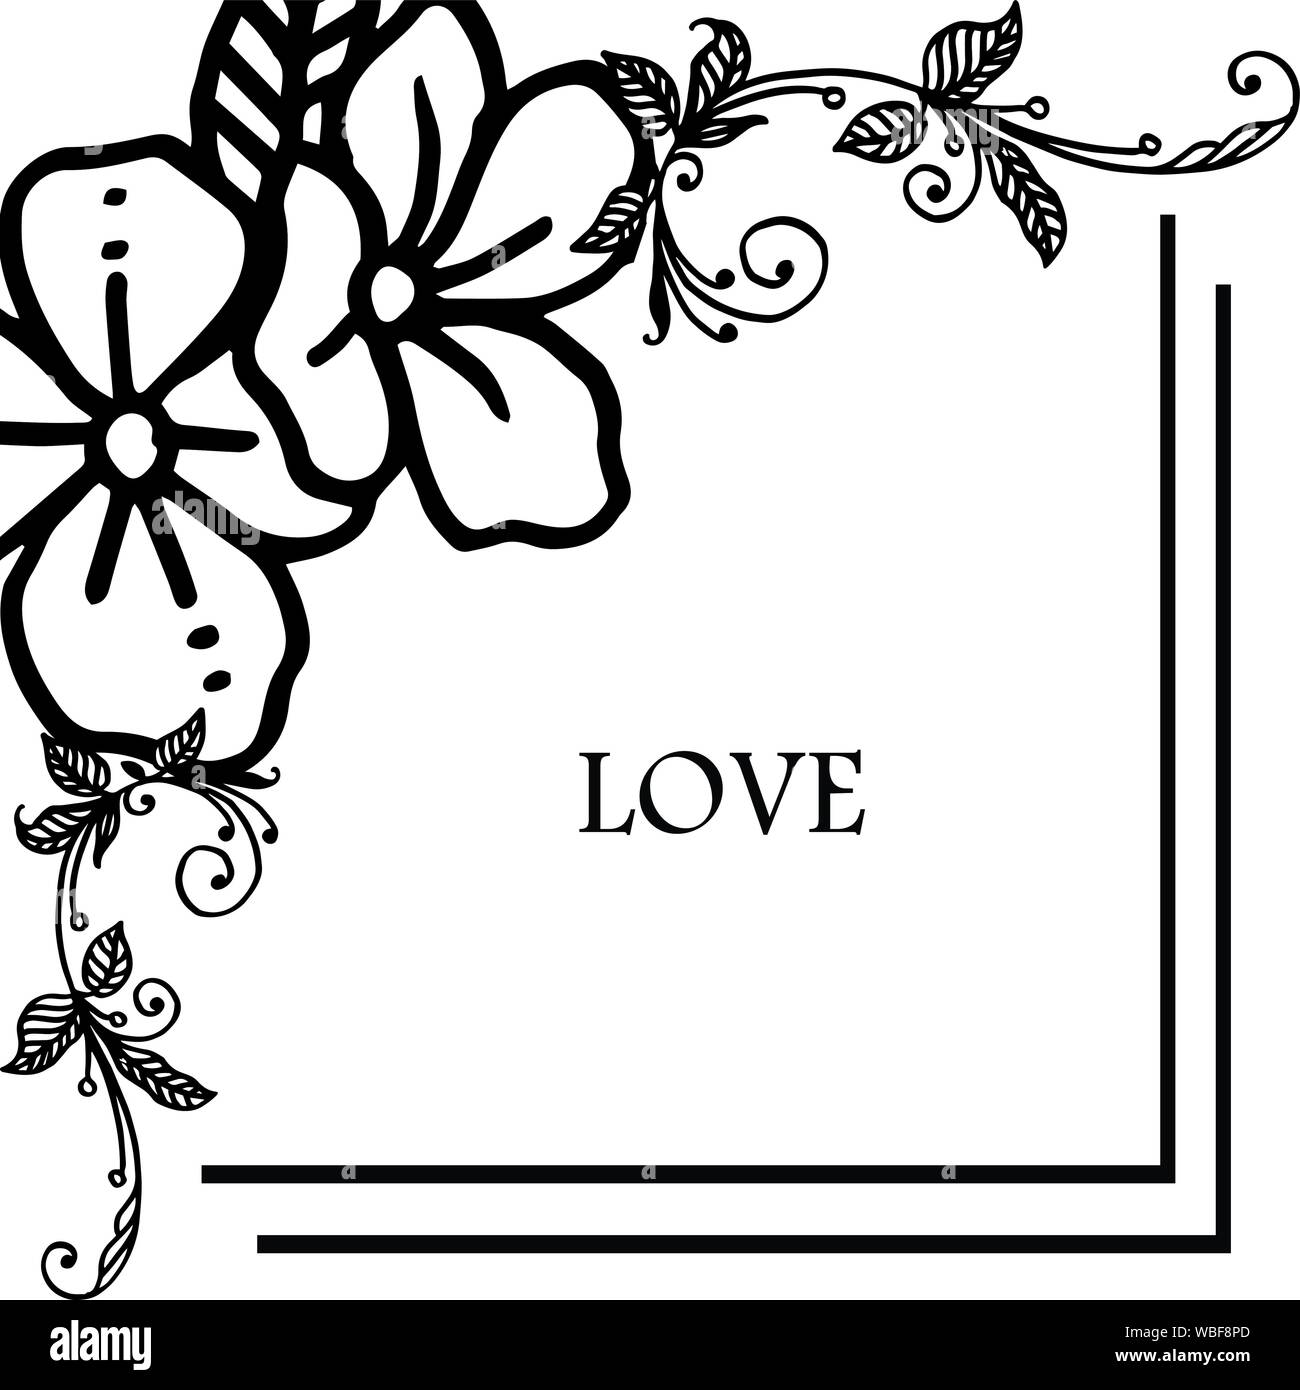 Decorative of love letter with border pattern of wreath frame ...